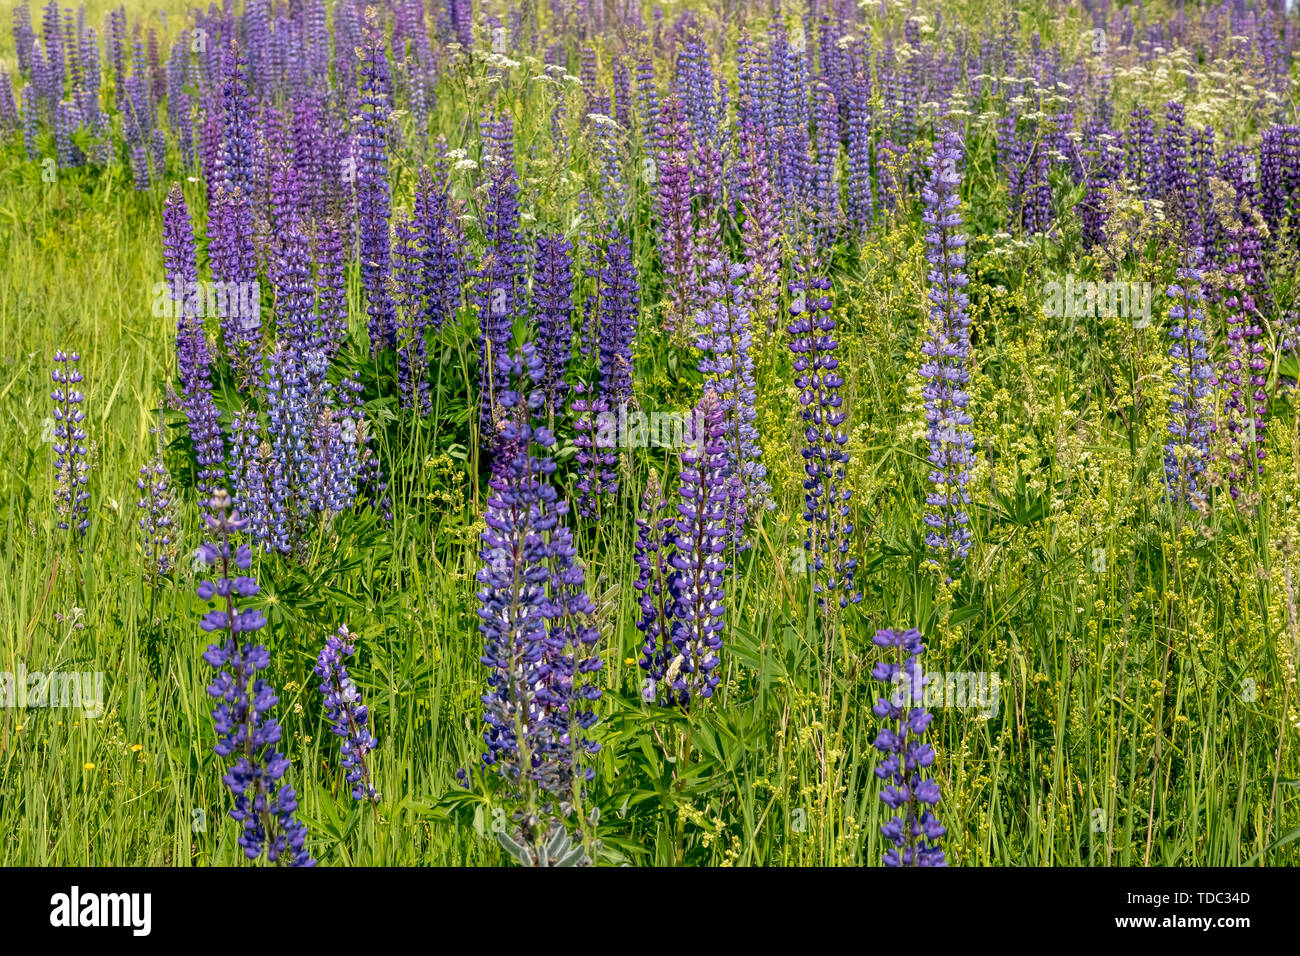 Blooming lupine flowers. A field of lupines. Sunlight shines on plants. Violet spring and summer flowers. Gentle warm soft colors, blurred background. Stock Photo